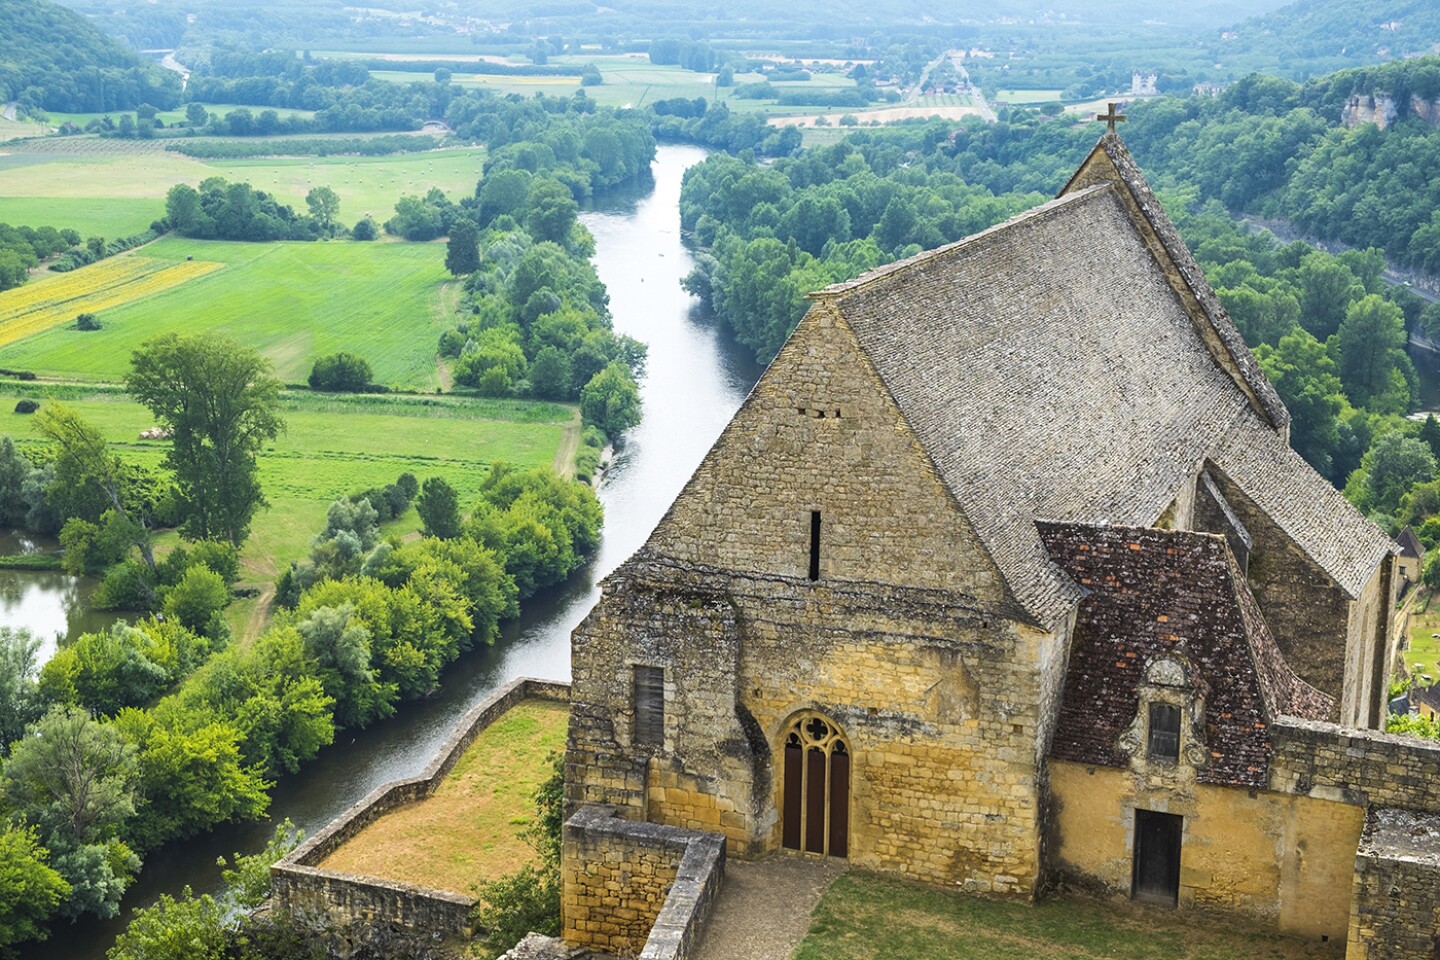 <h2>7. Château de Beynac</h2> <p><i>Beynac-et-Cazenac, France</i></p> <p> This 12th-century fortress may not rank among the prettiest of <a class="Link" href="https://www.afar.com/magazine/beautiful-castles-in-france-that-you-can-visit-1e31e5cc-93df-4ba3-ad6c-18134d7338e6">France’s many castles</a>, but its towering position, atop a sheer, 500-foot limestone cliff above the Dordogne River, certainly stands out. (Don’t miss the views from atop the battlements.) A double crenellated wall and twin moat protected <a class="Link" href="https://chateau-beynac.com/?lang=en" rel="noopener">Château de Beynac</a> during the 100 Years War, and it’s one of the best-preserved in southwest <a class="Link" href="https://www.afar.com/travel-guides/france/guide" rel="noopener">France</a>’s Dordogne Valley. Pick up the audio tour and wander the austere, sparsely furnished rooms of the fortification, including the ancient keep, 13th-century kitchens, and the oratory, lined with 15th-century frescoes. Later rooms date from the 17th century and are decorated with ornate tapestries from the period.</p> <h3>How to visit Château de Beynac</h3> <p>You’ll need a car to get to Château de Beynac; there’s parking next to the castle or it’s a 15-minute walk up from the pretty village of Beynac-et-Cazenac, about a 2.5-hour drive east from <a class="Link" href="https://www.afar.com/travel-tips/the-essential-guide-to-bordeaux" rel="noopener">Bordeaux</a>. </p>